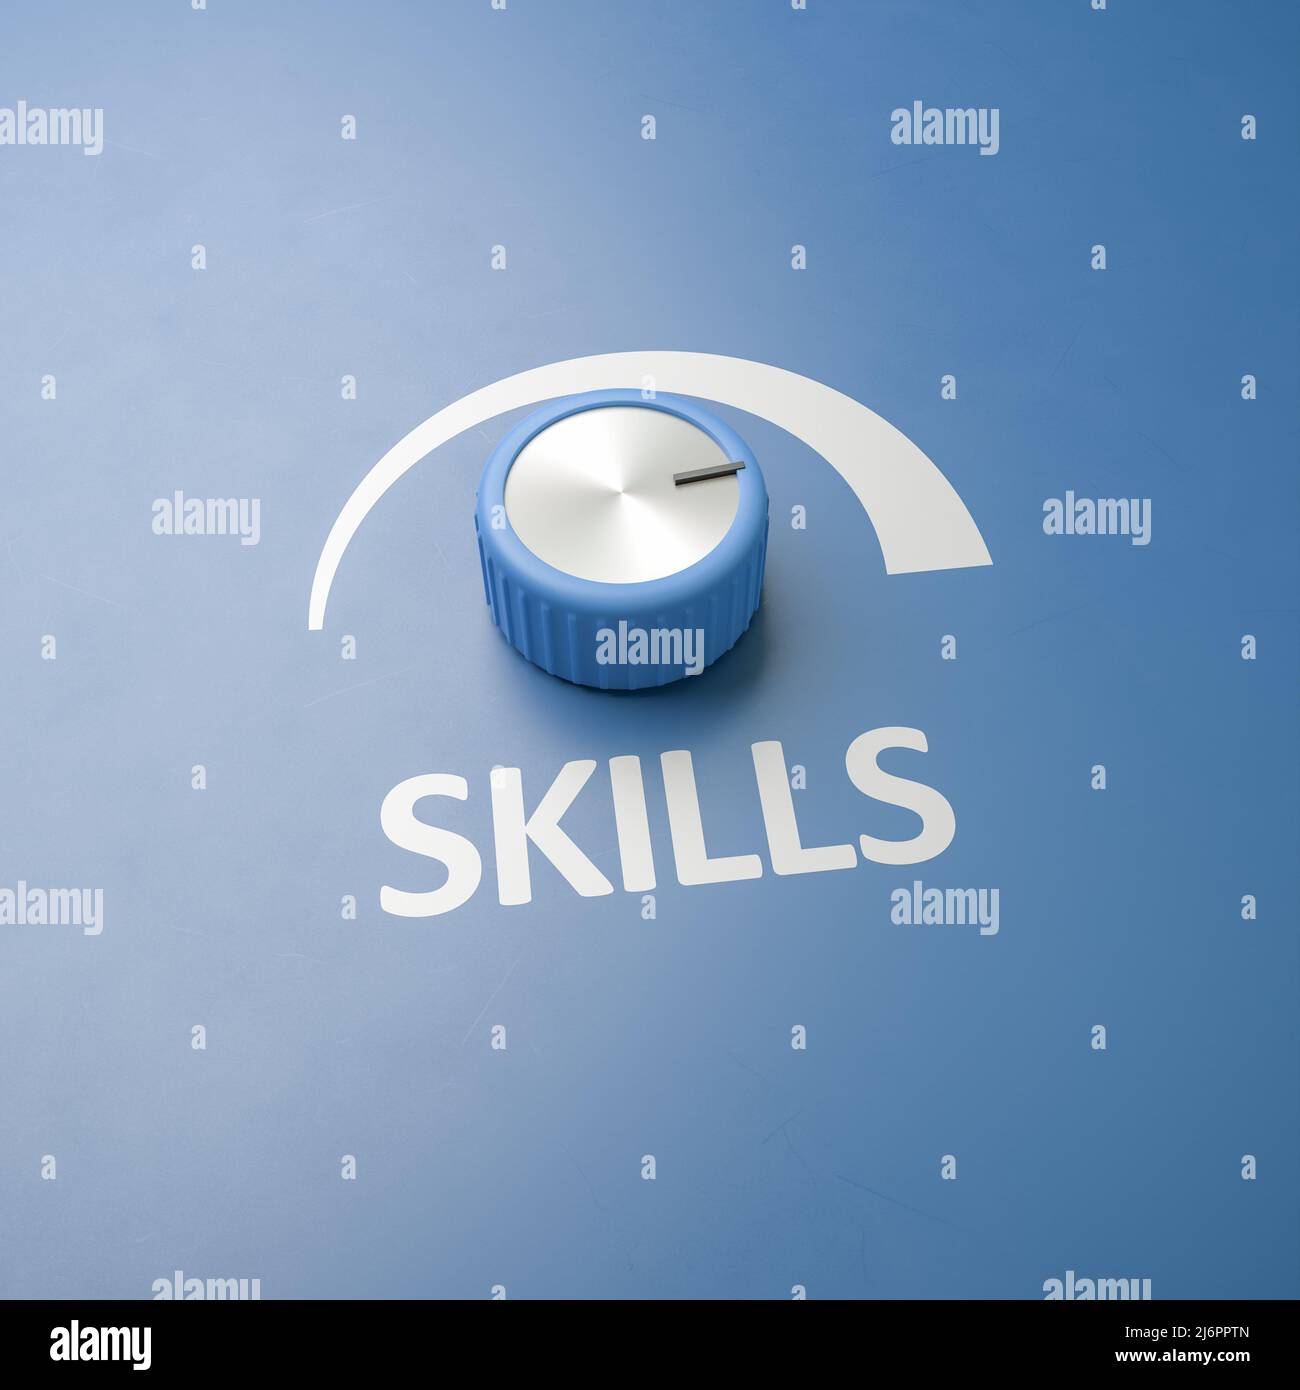 Blue Knob turned on full level with the word 'Skills' as a label - concept for measures to improve skills. Copy space around for better cropping Stock Photo